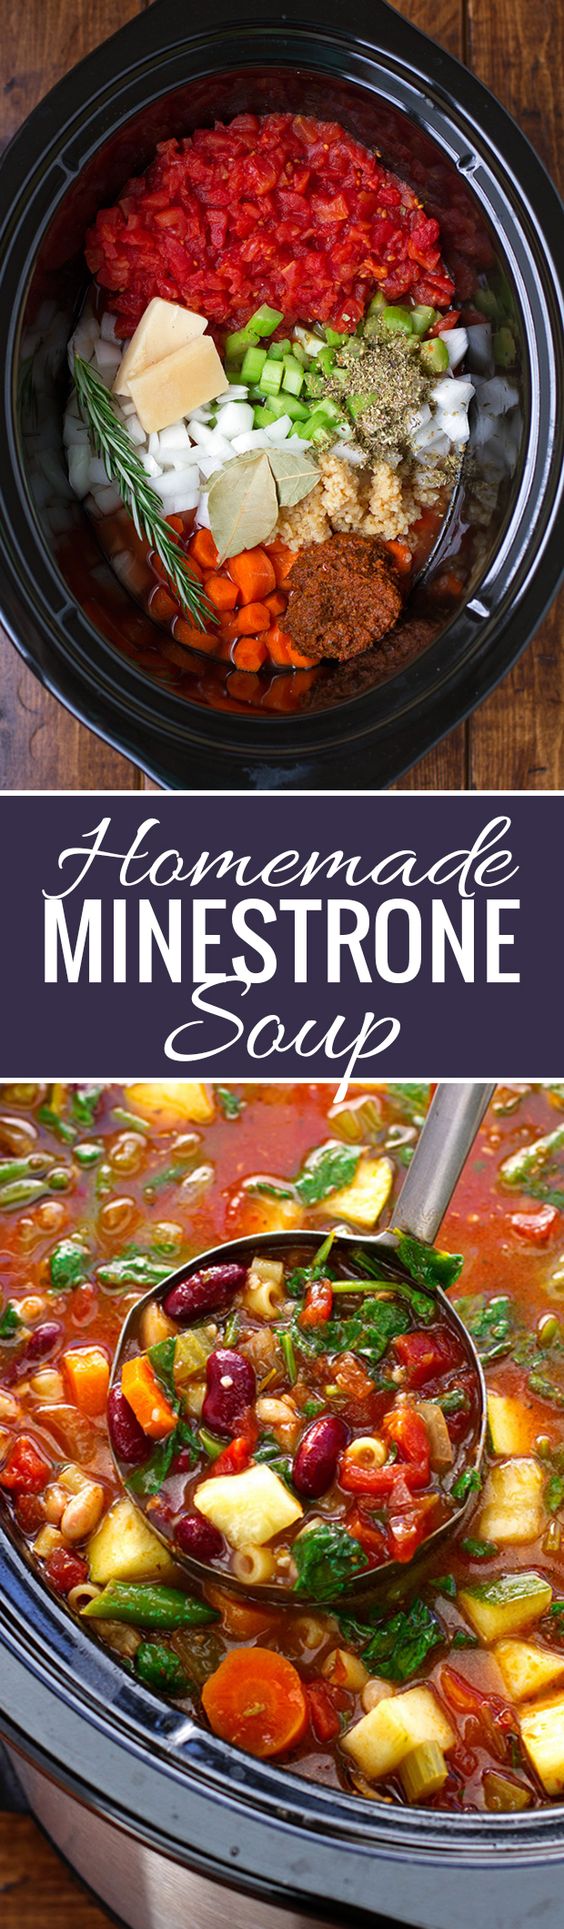 Learn how to make homemade vegetable soup like this minestrone in a slow cooker. Discover healthy slow cooker recipes in this helpful article. #mealprep #nobake #healthylifestyle #healthyliving #nutrition #healthymeals #healthyrecipes 